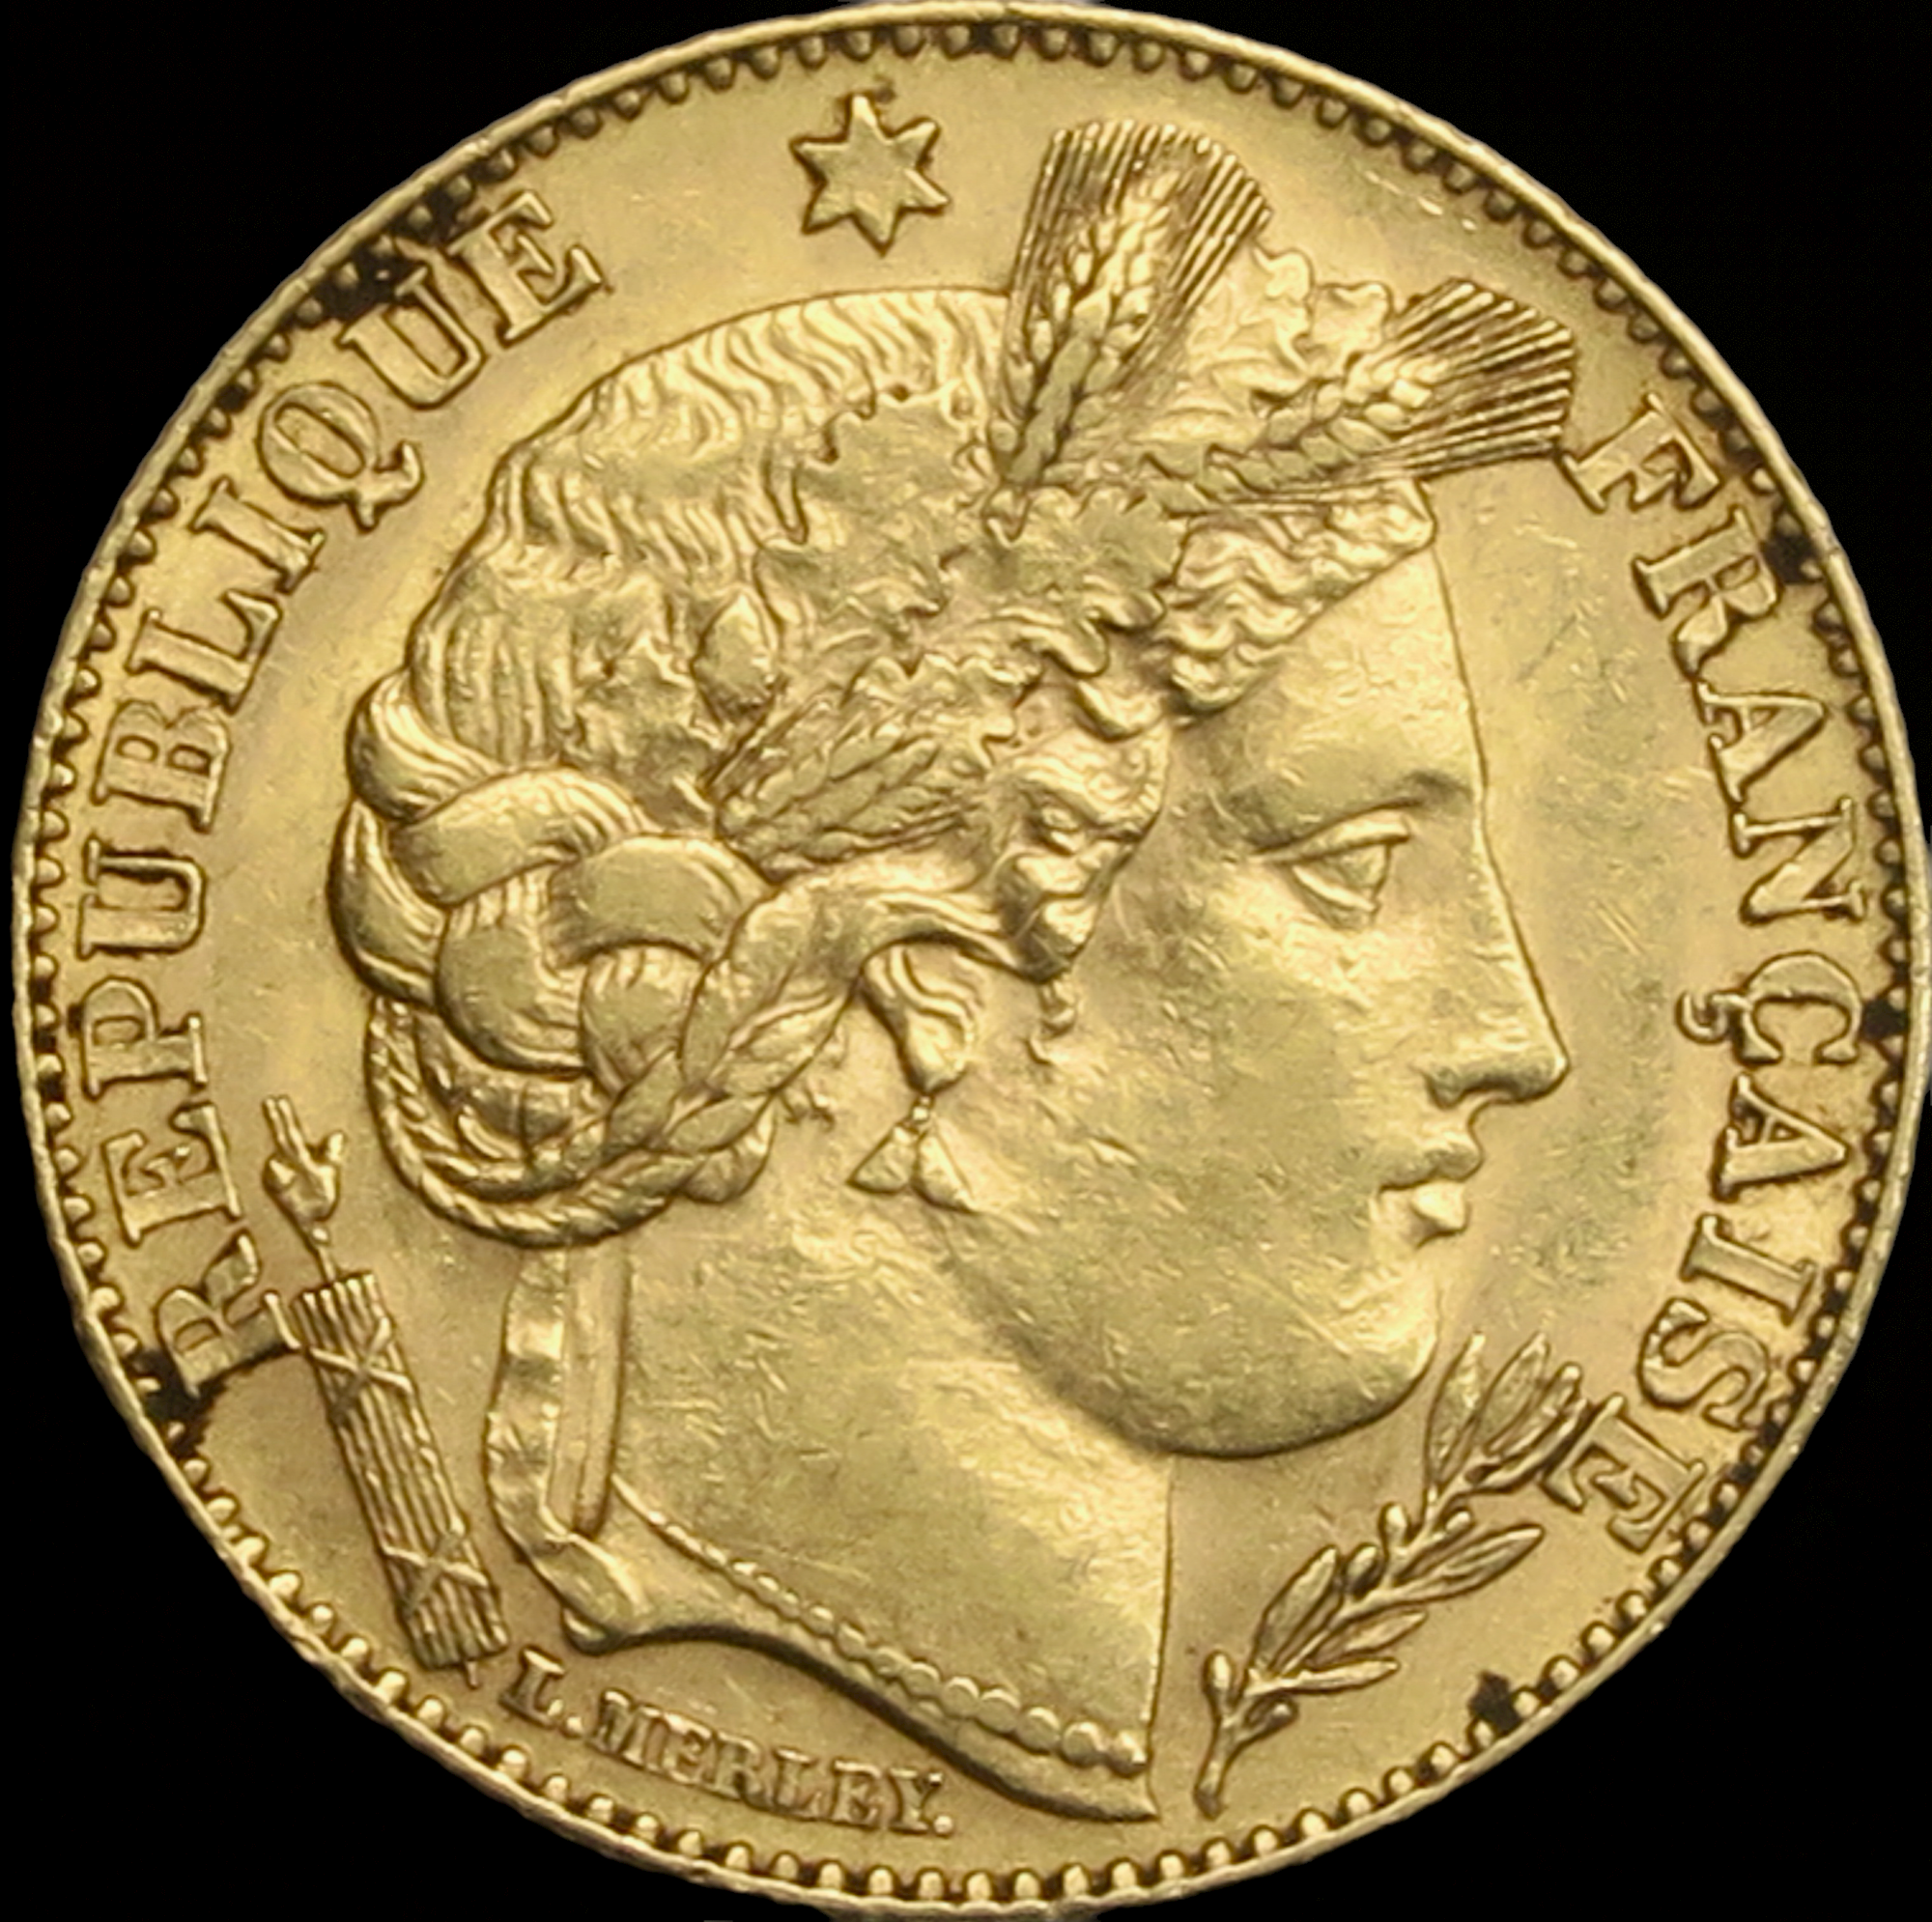 French gold coins